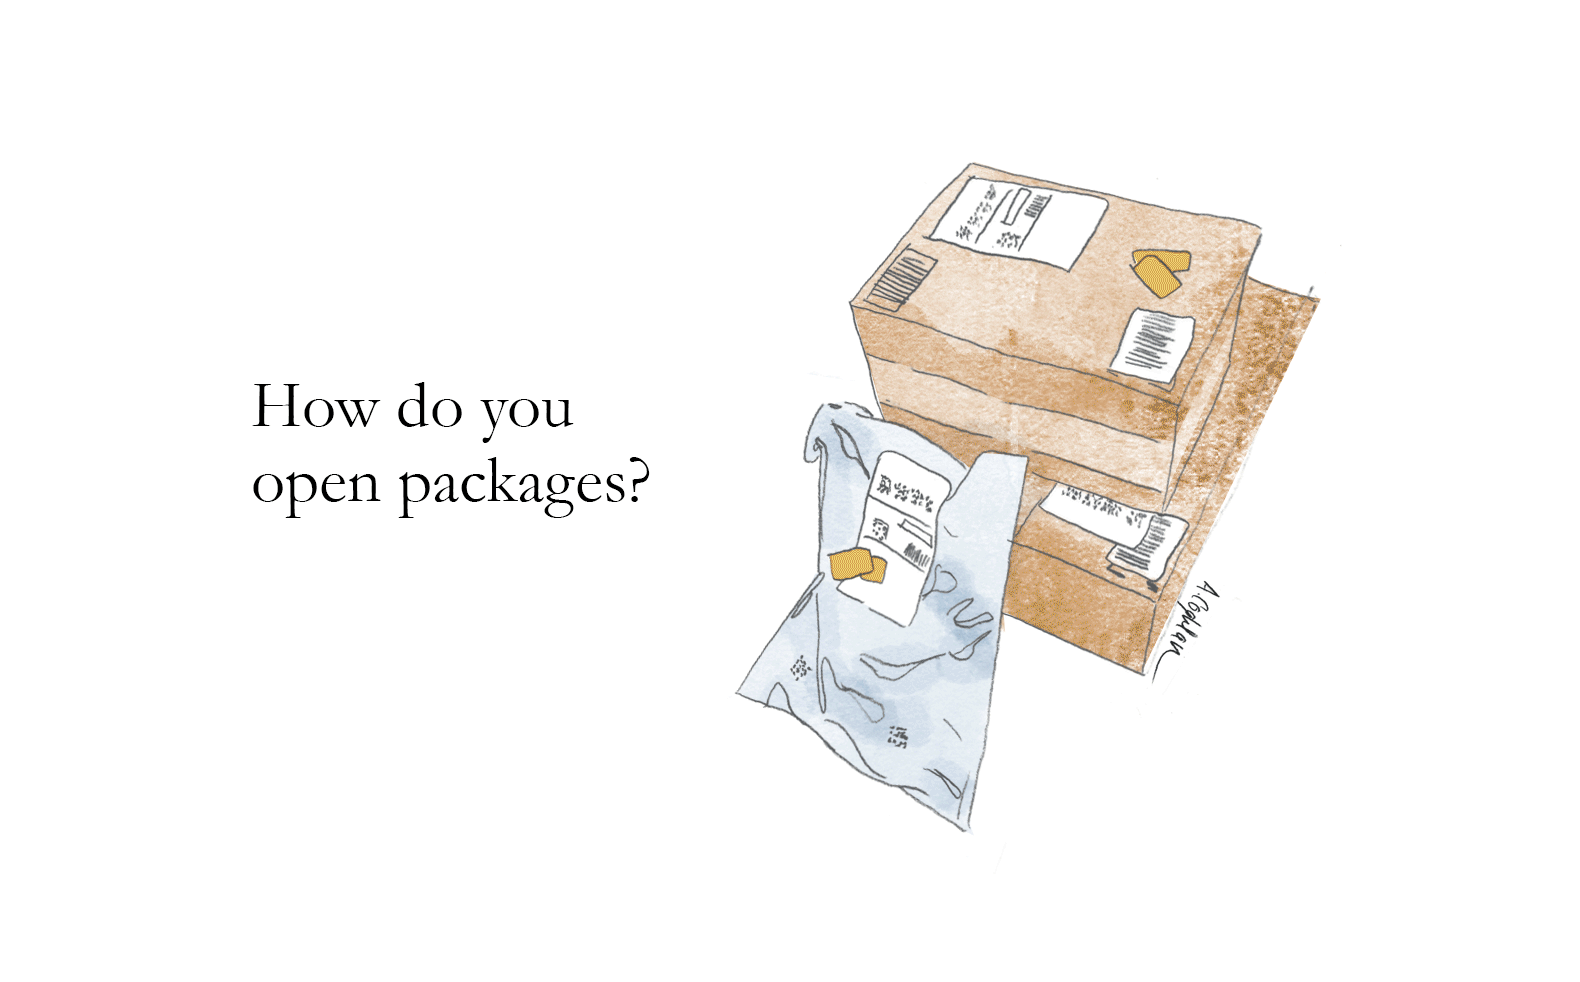 An illustration of a stack of packages accompanied by the question “How do you open packages?”